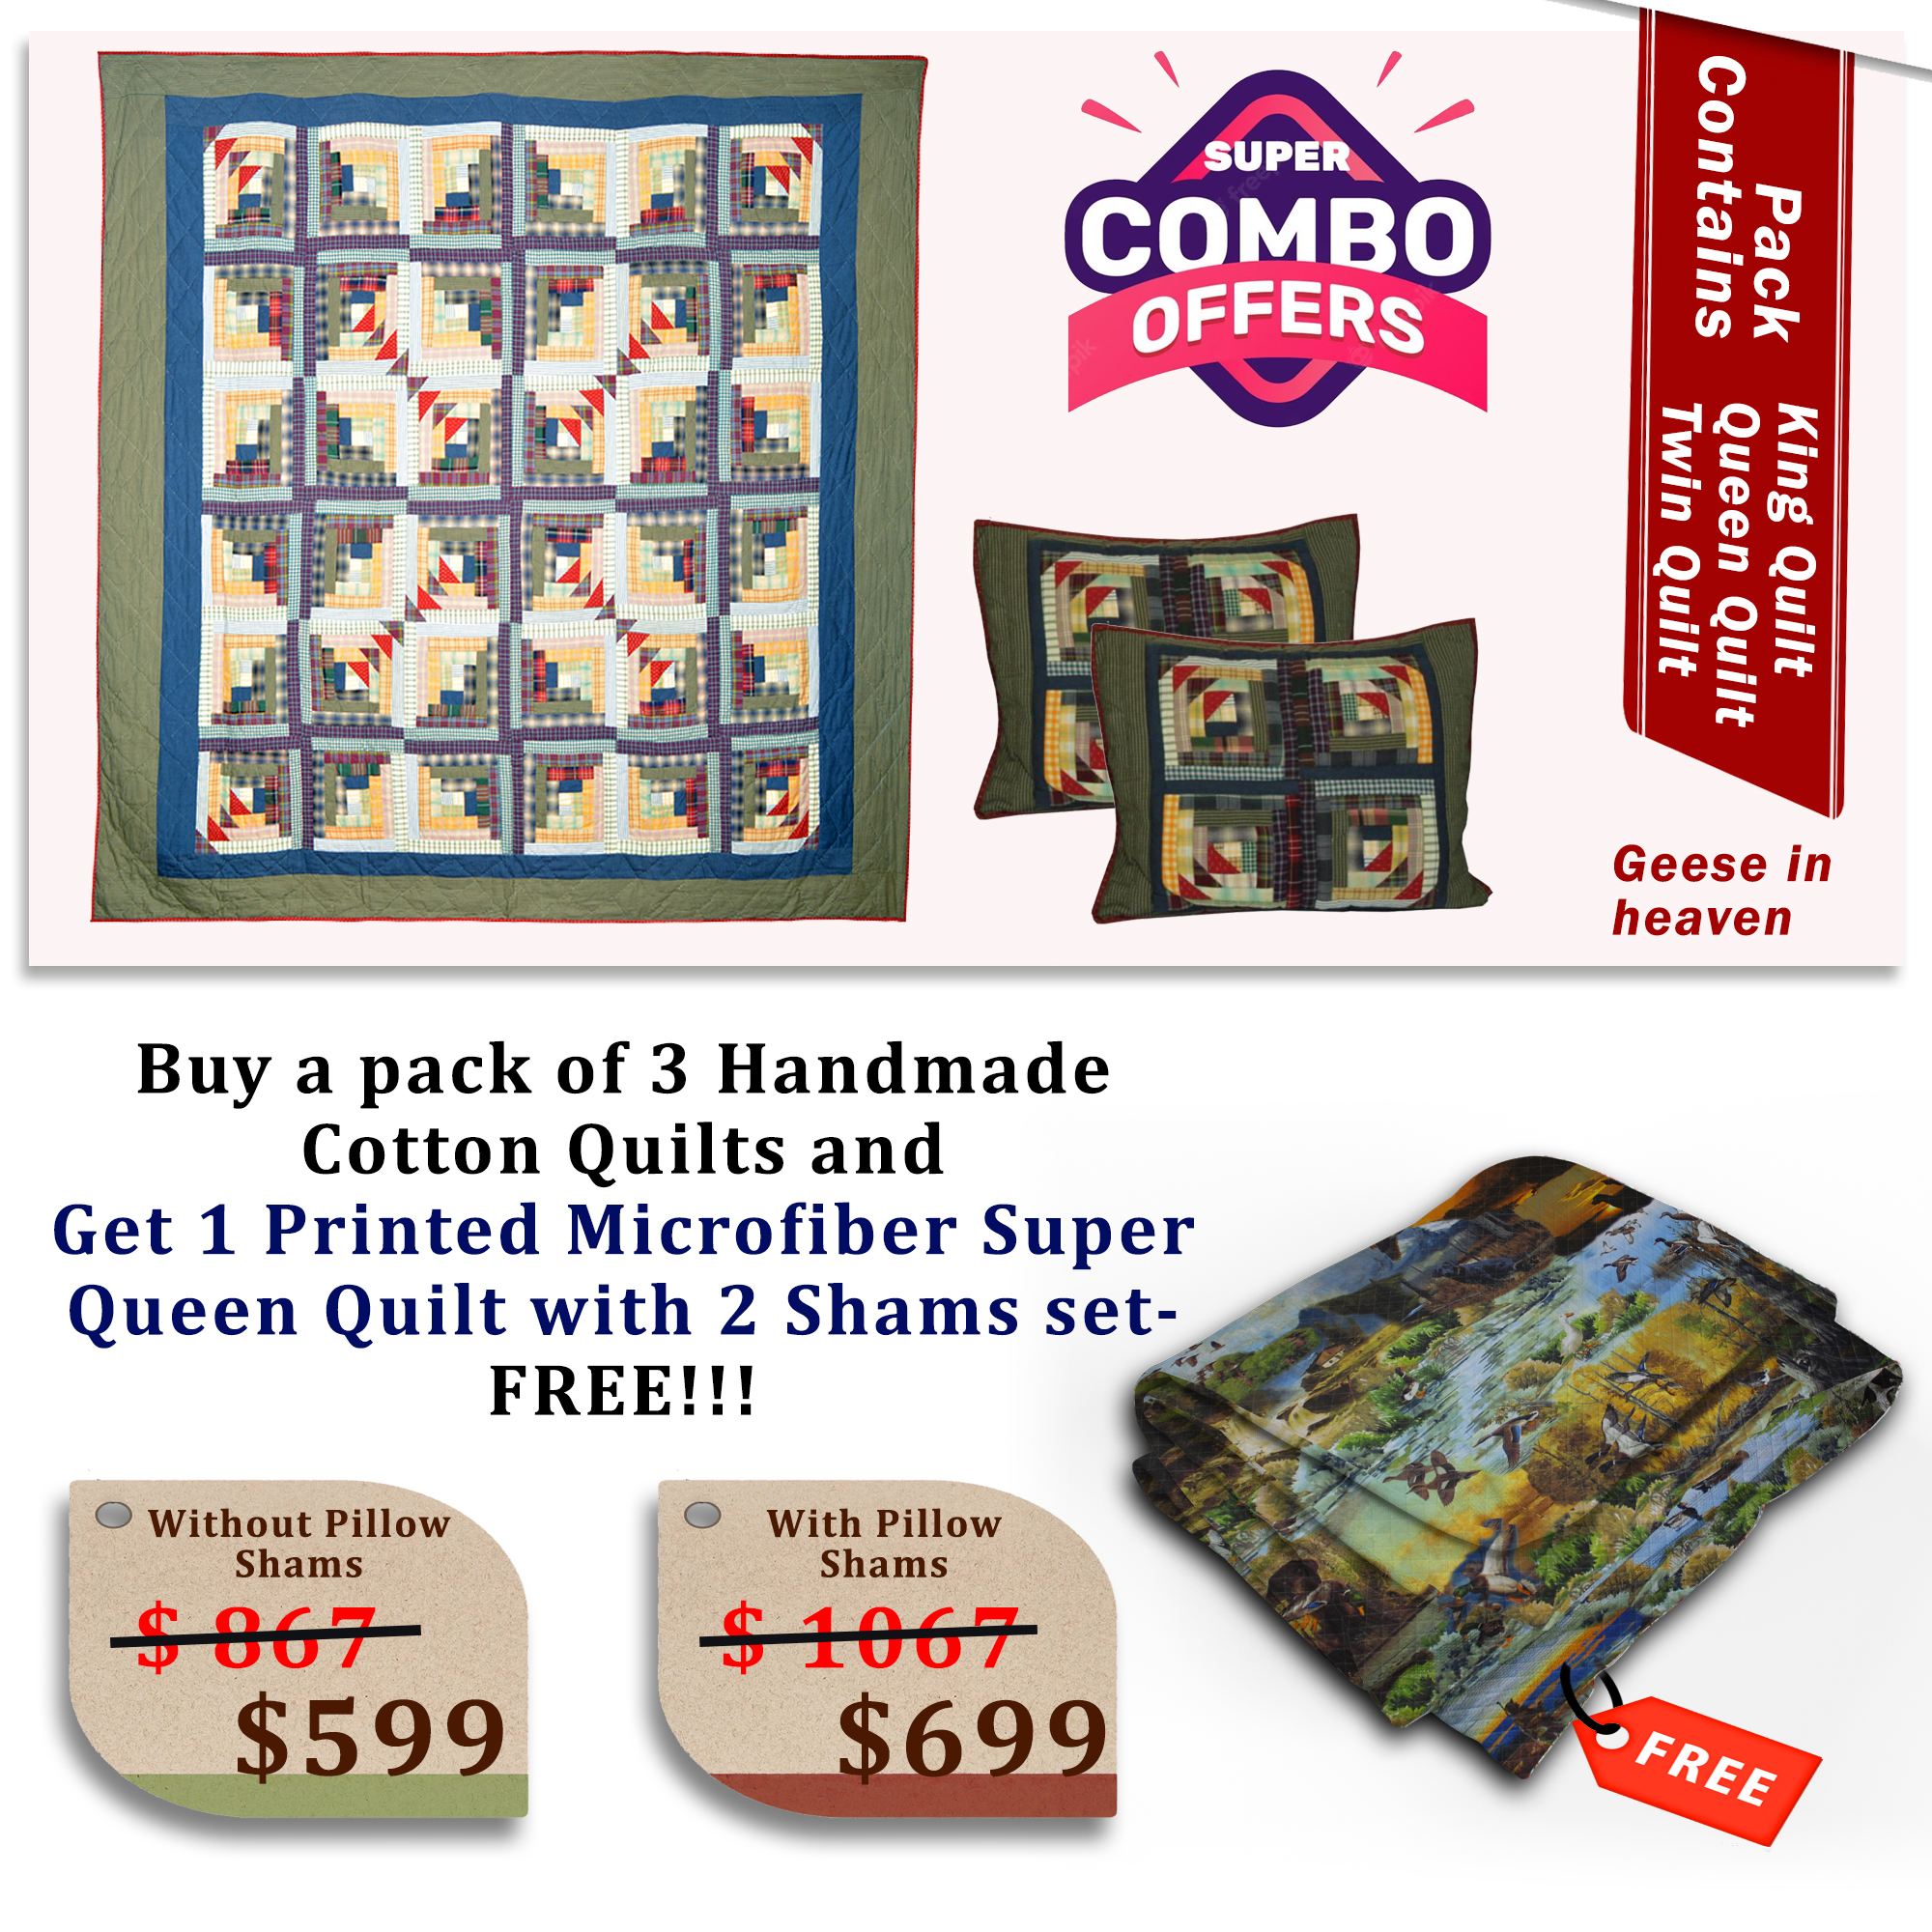 Geese in heaven - Handmade Cotton quilts | Matching pillow shams | Buy 3 cotton quilts and get 1 Printed Microfiber Super Queen Quilt with 2 Shams set FREE